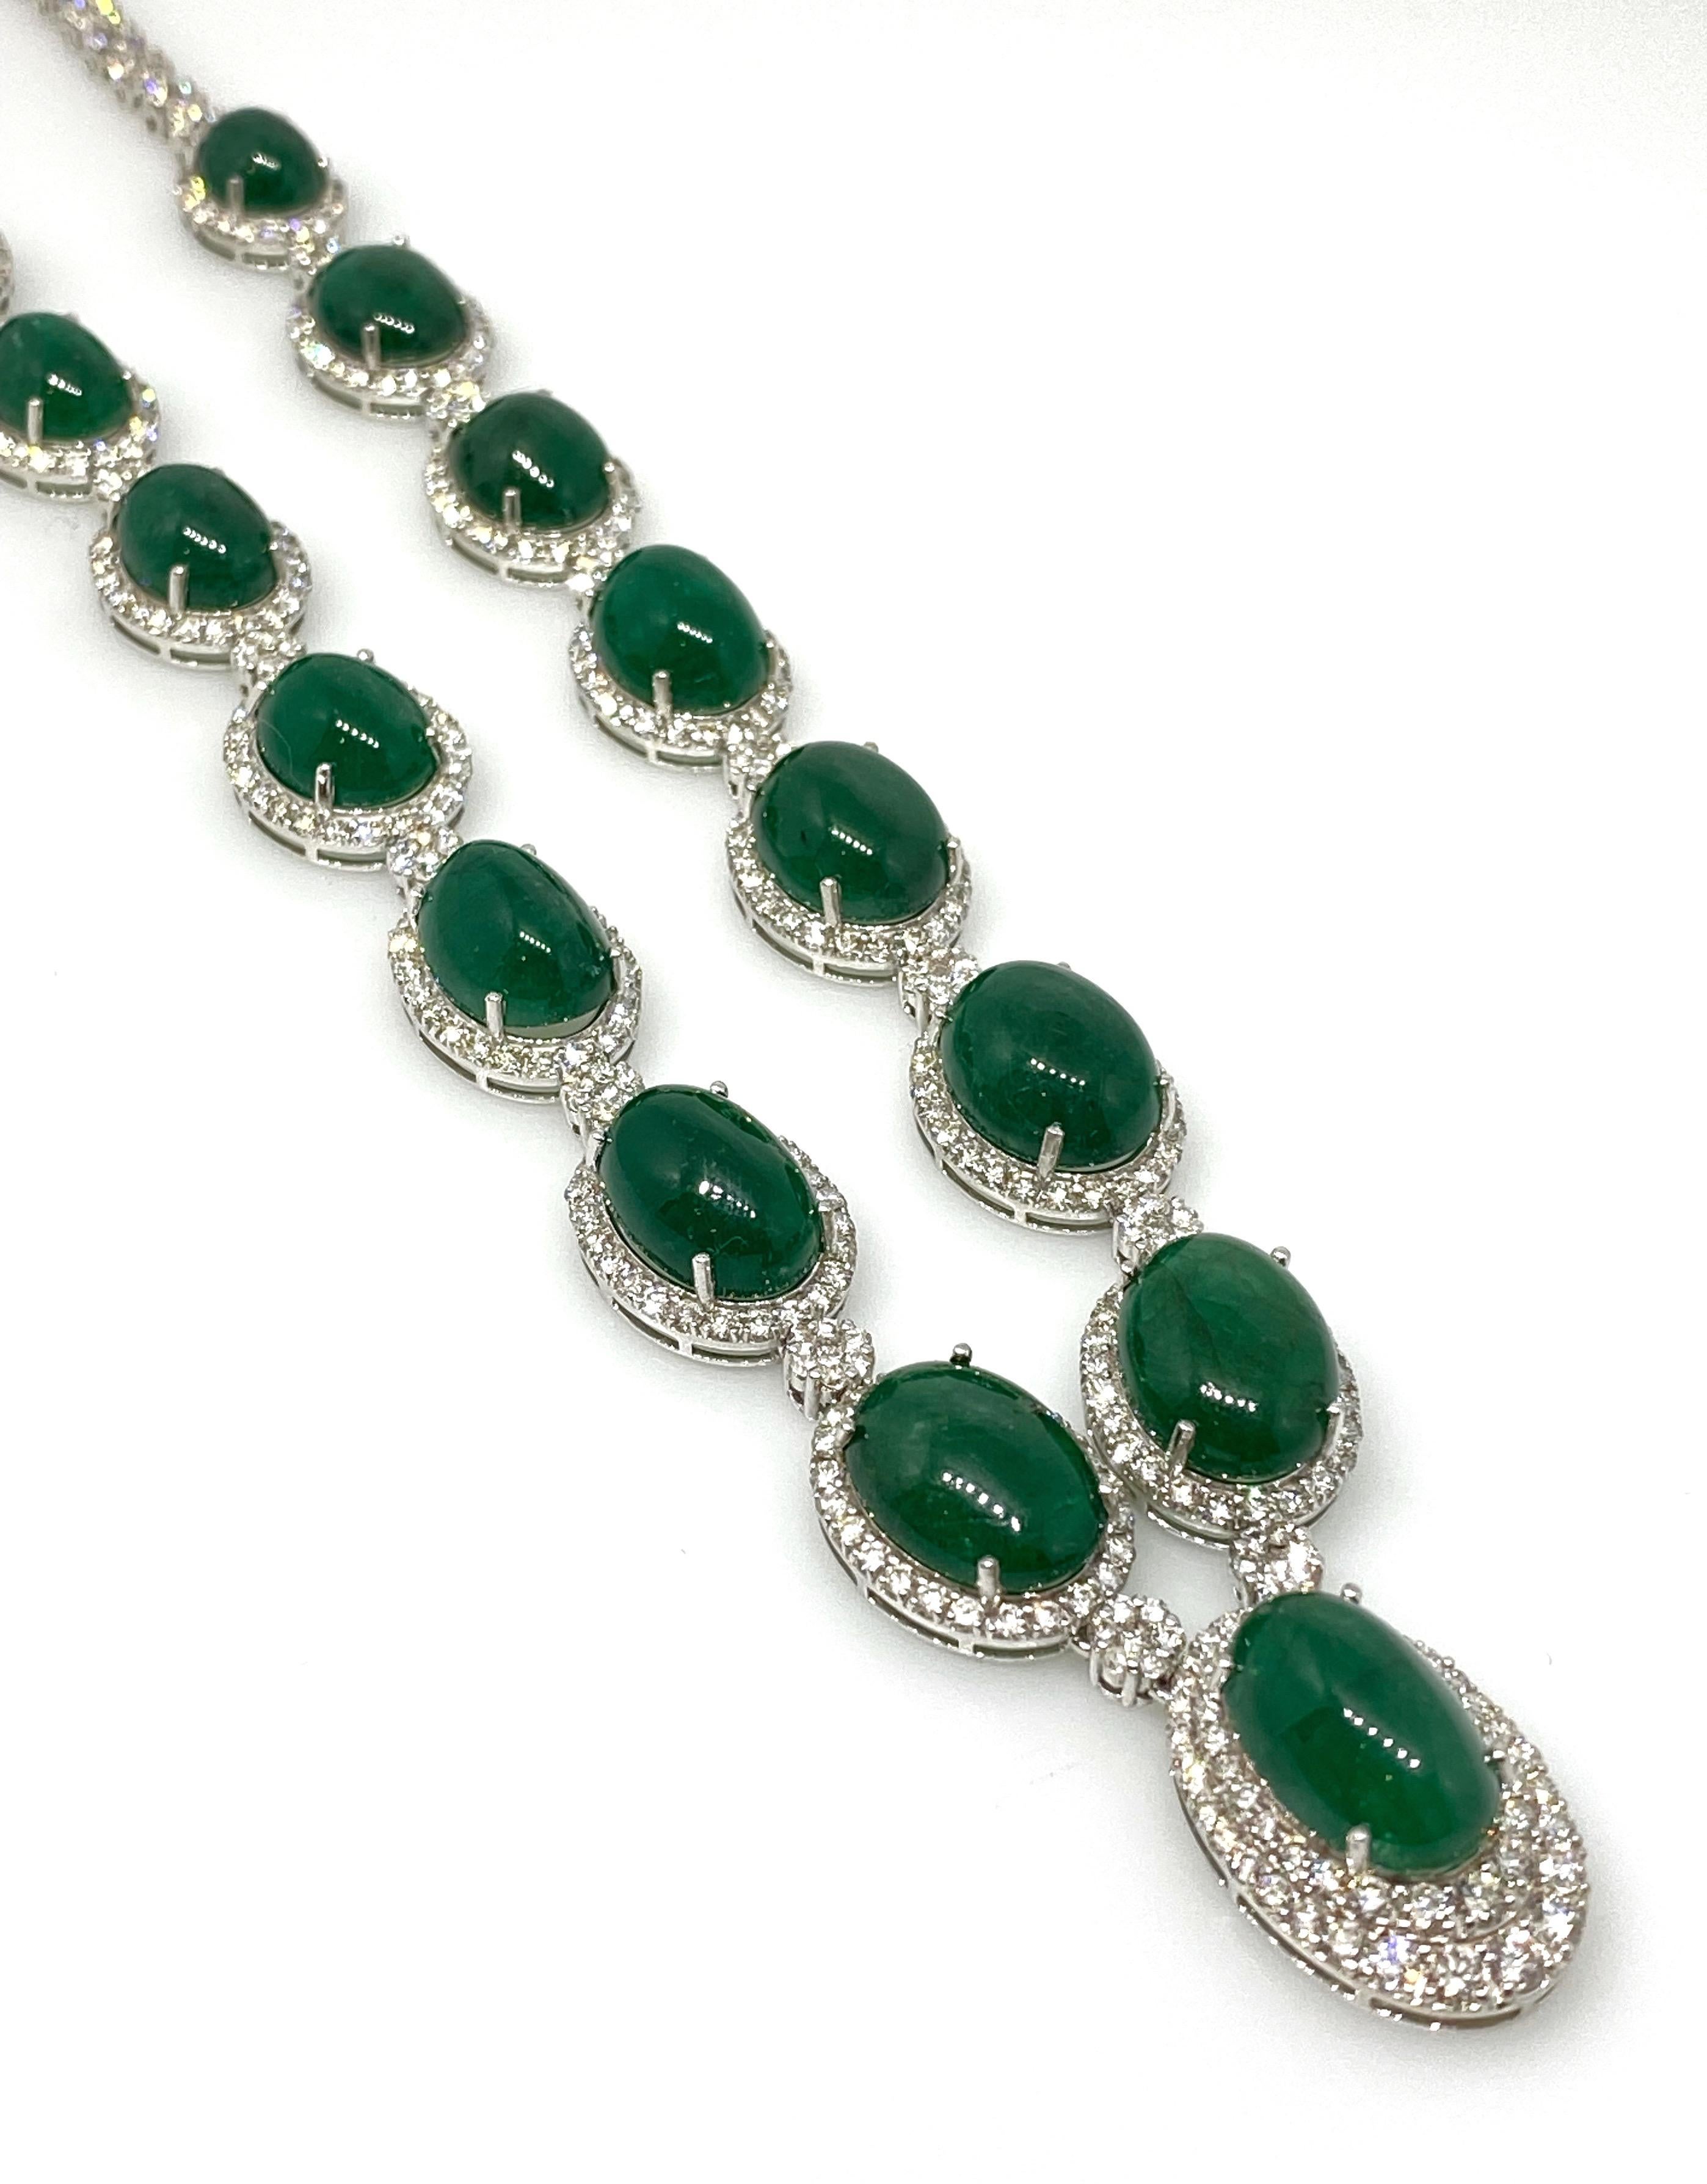 Cabochon Emerald and Diamond Necklace 100.00cttw in 18k White Gold In Excellent Condition For Sale In La Jolla, CA